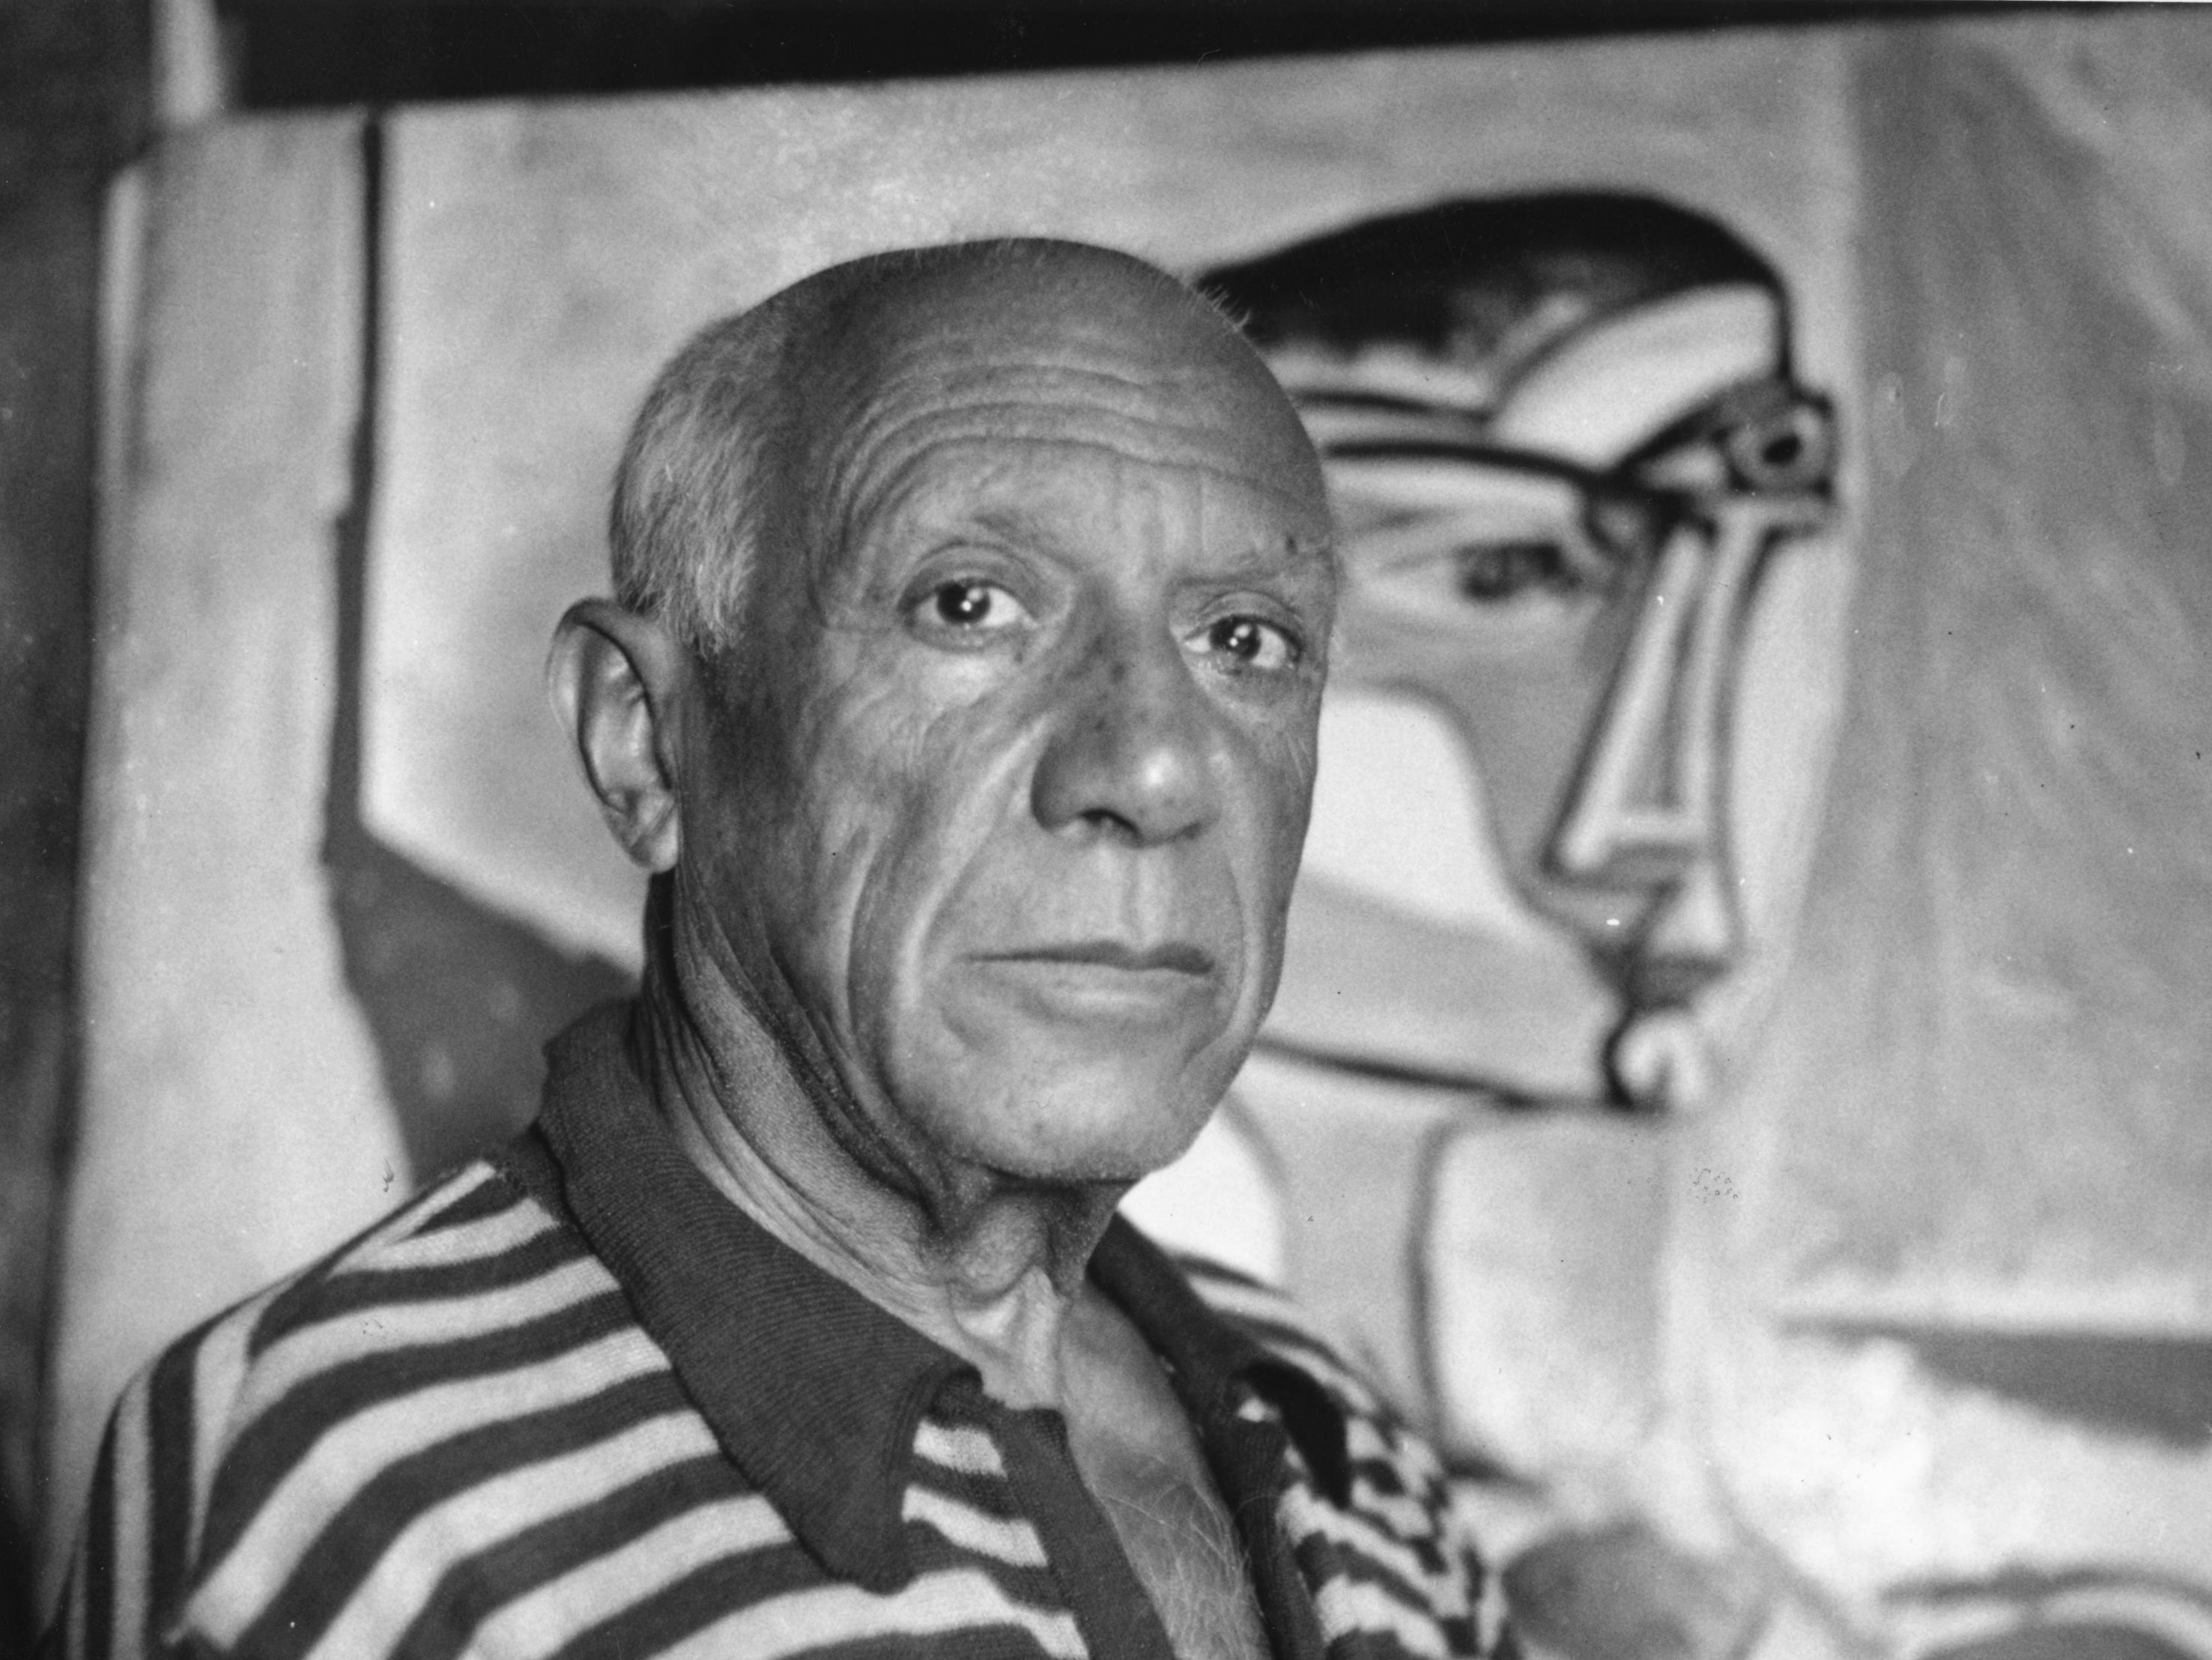 Picasso 50 years on: Greatest artist of the 20th century, or cancel-worthy  misogynist? | The Independent